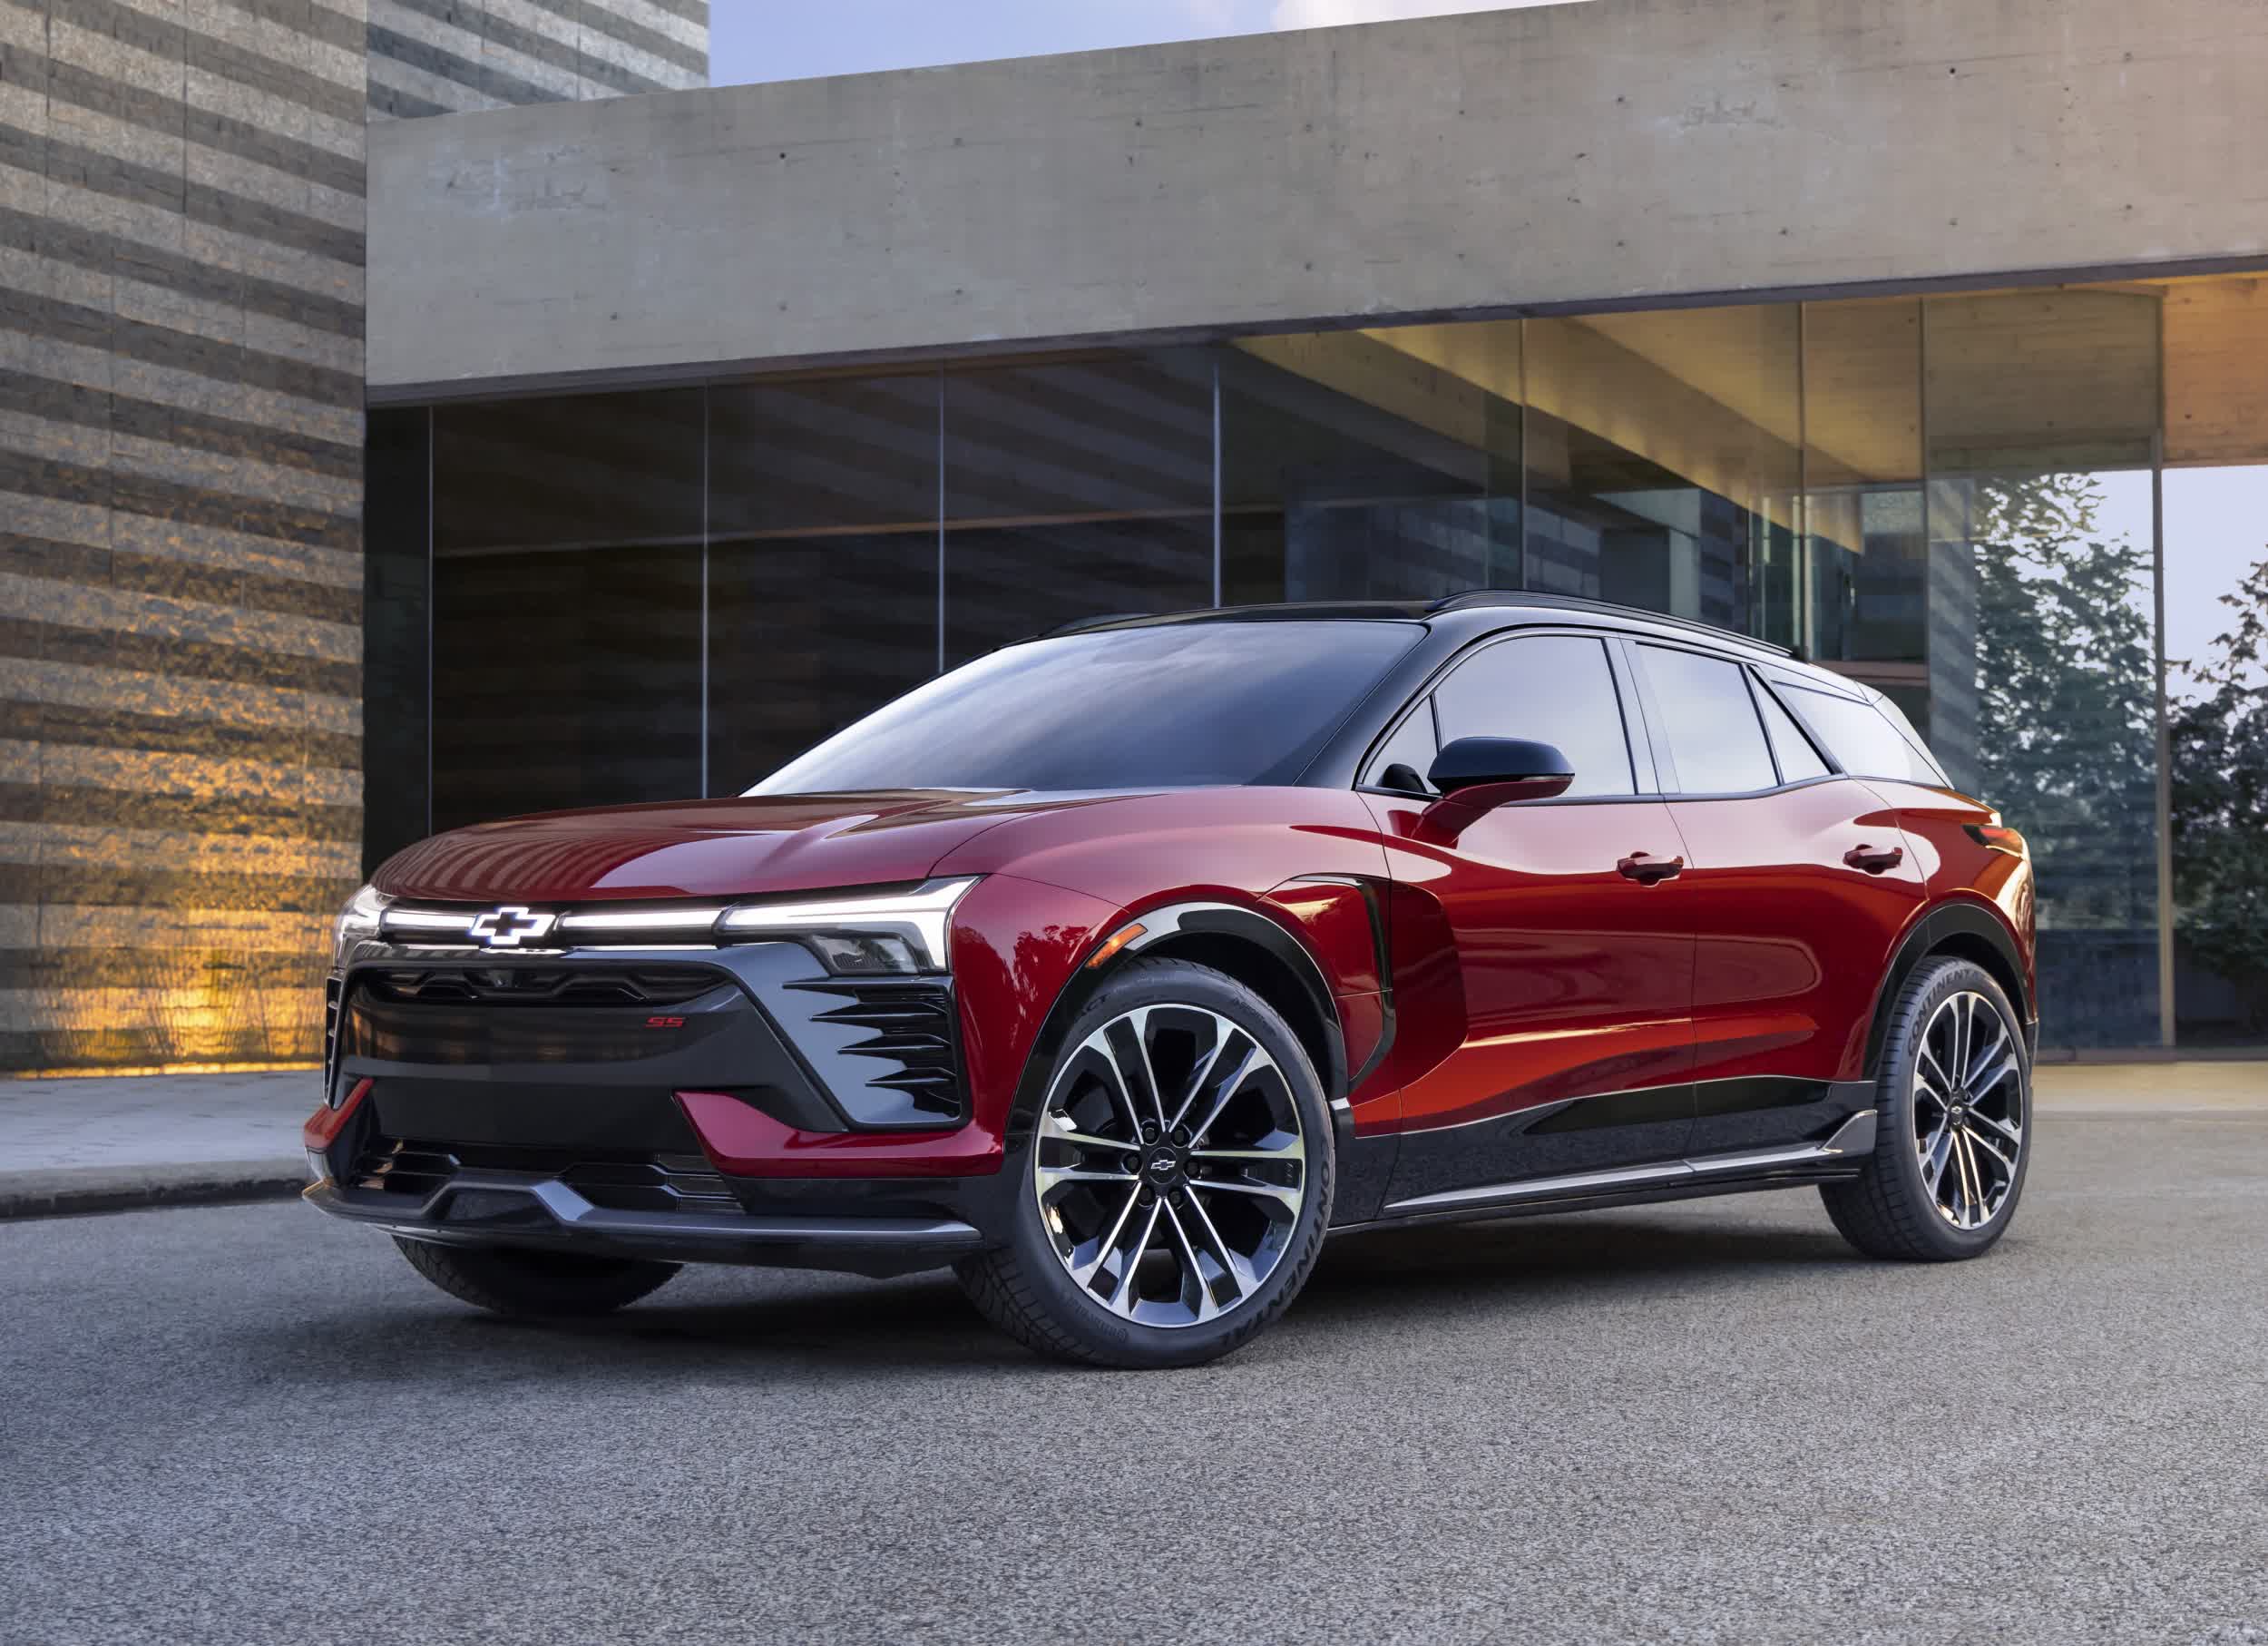 Chevy's Blazer is the latest gas-powered vehicle to get the EV treatment